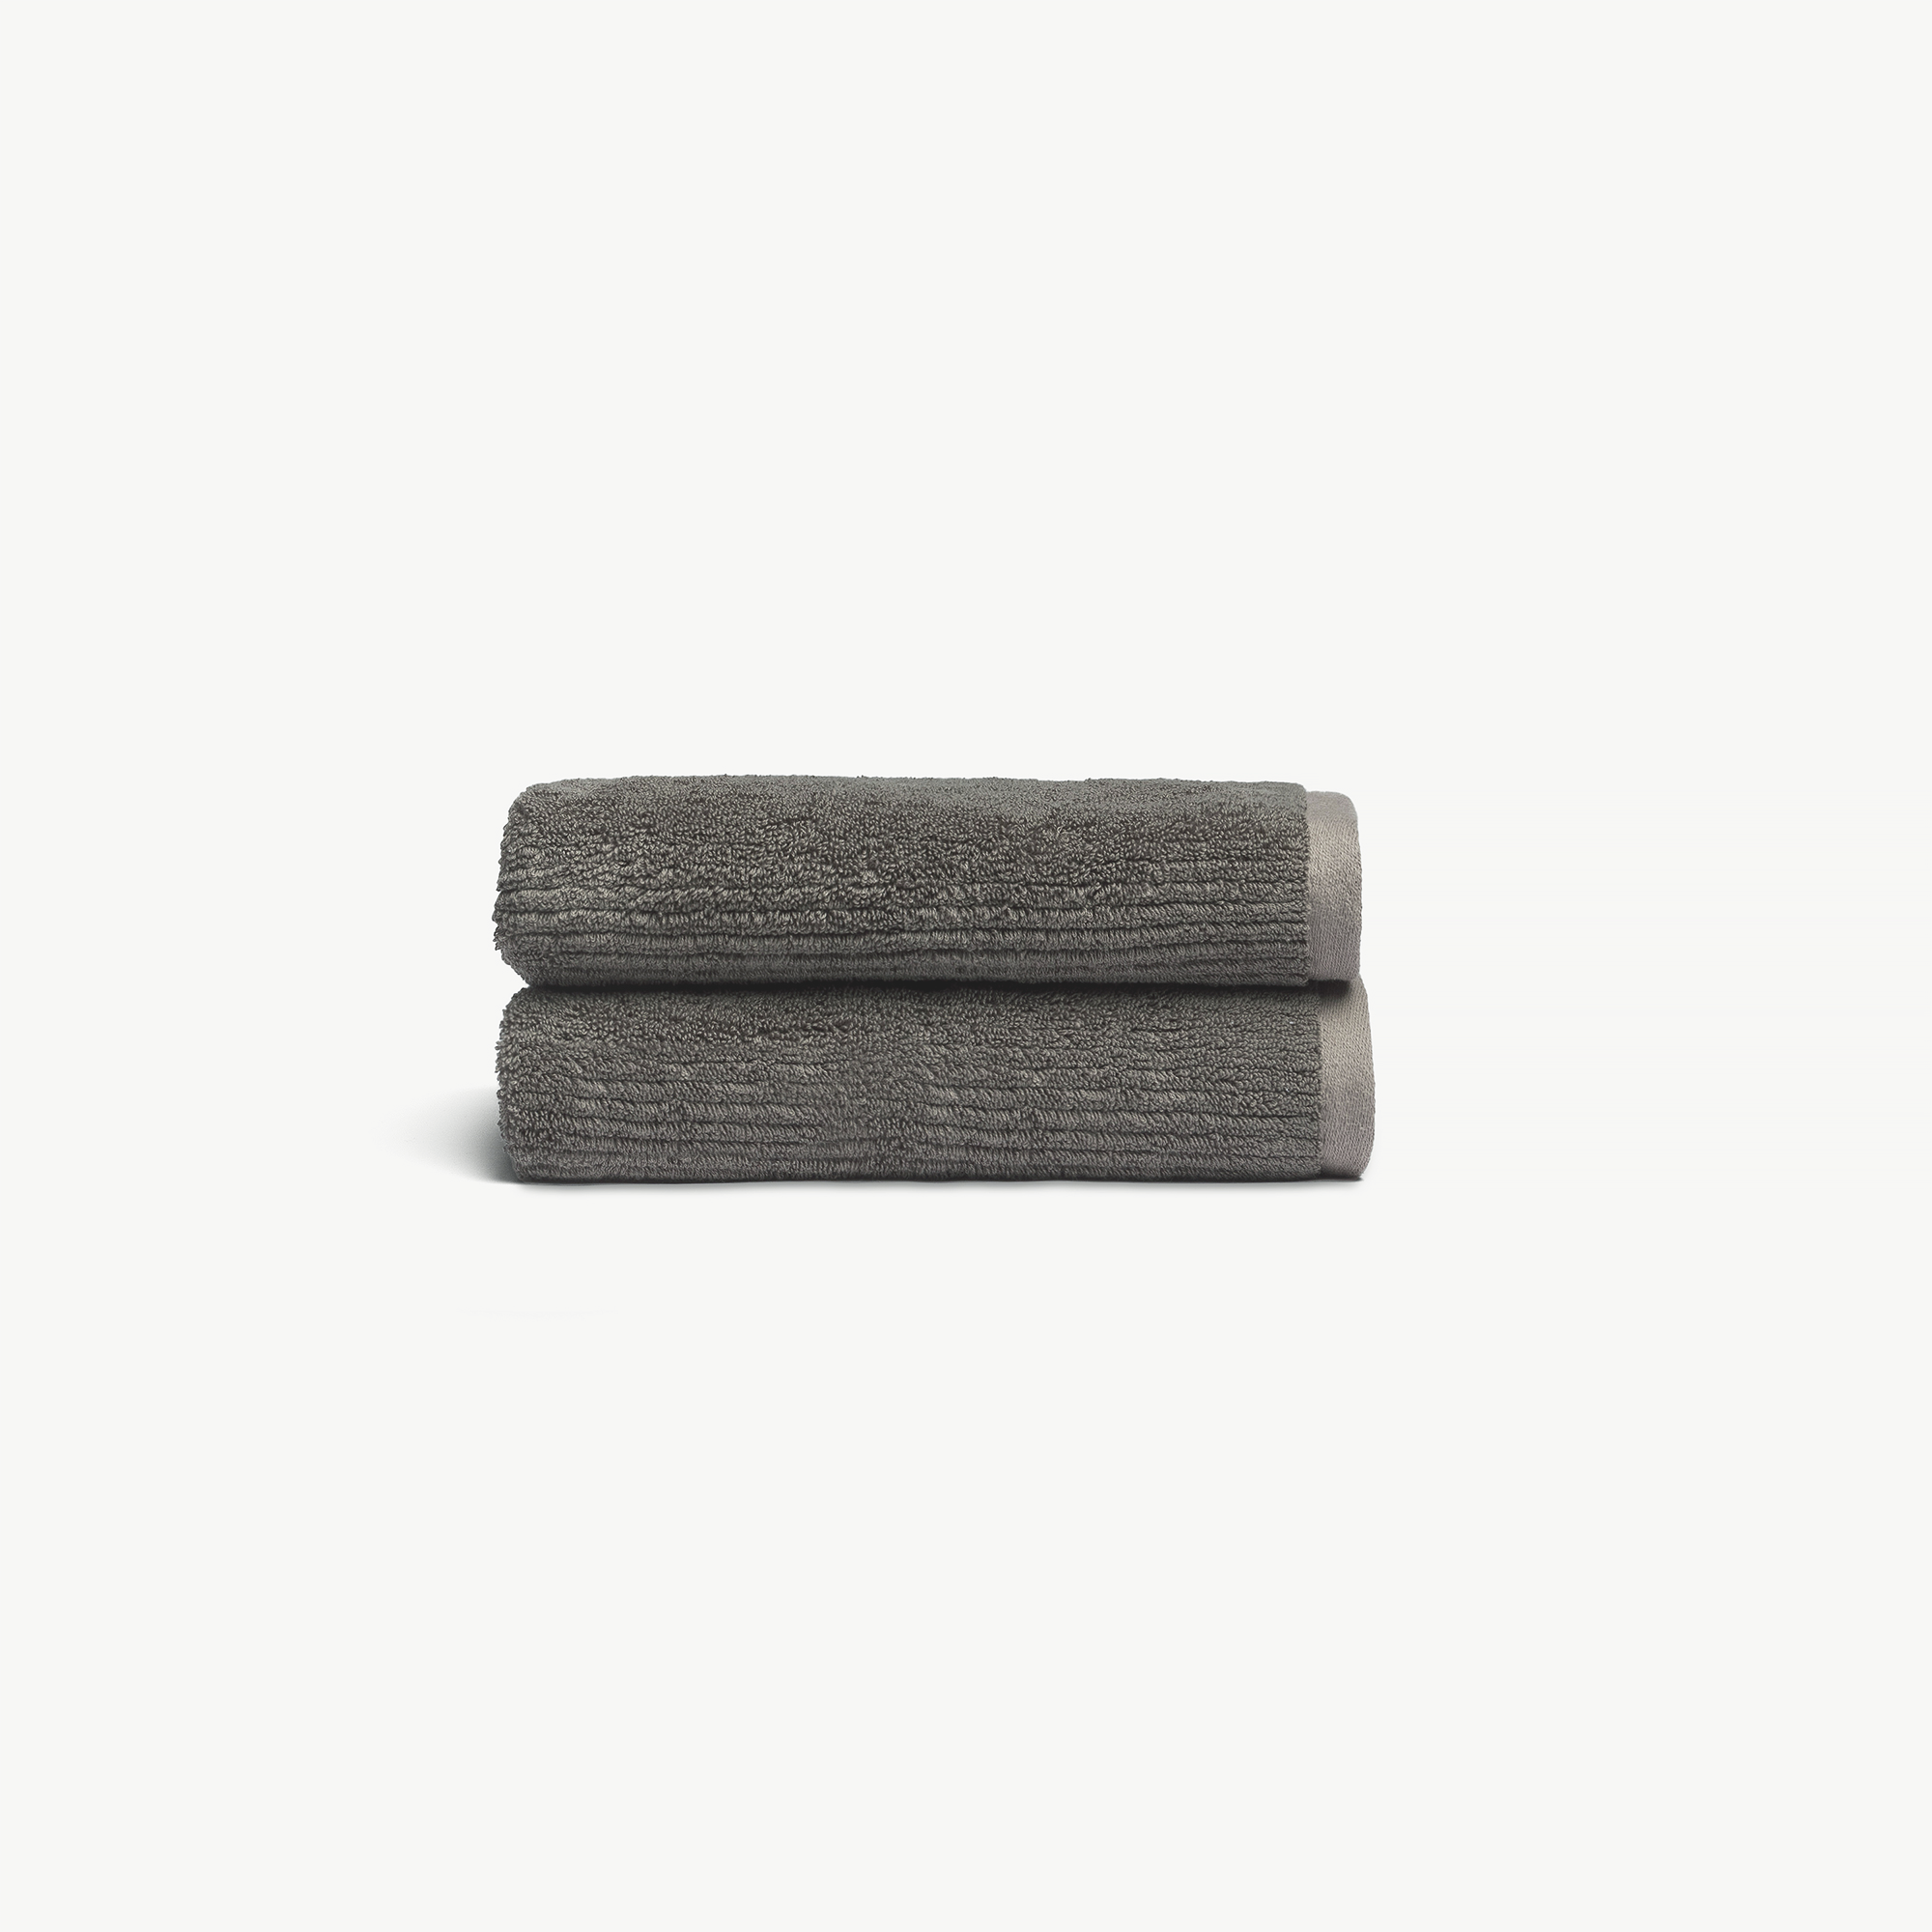 Ribbed Terry Hand Towels in the color Charcoal. Photo of product taken with a white background. |Color:Charcoal